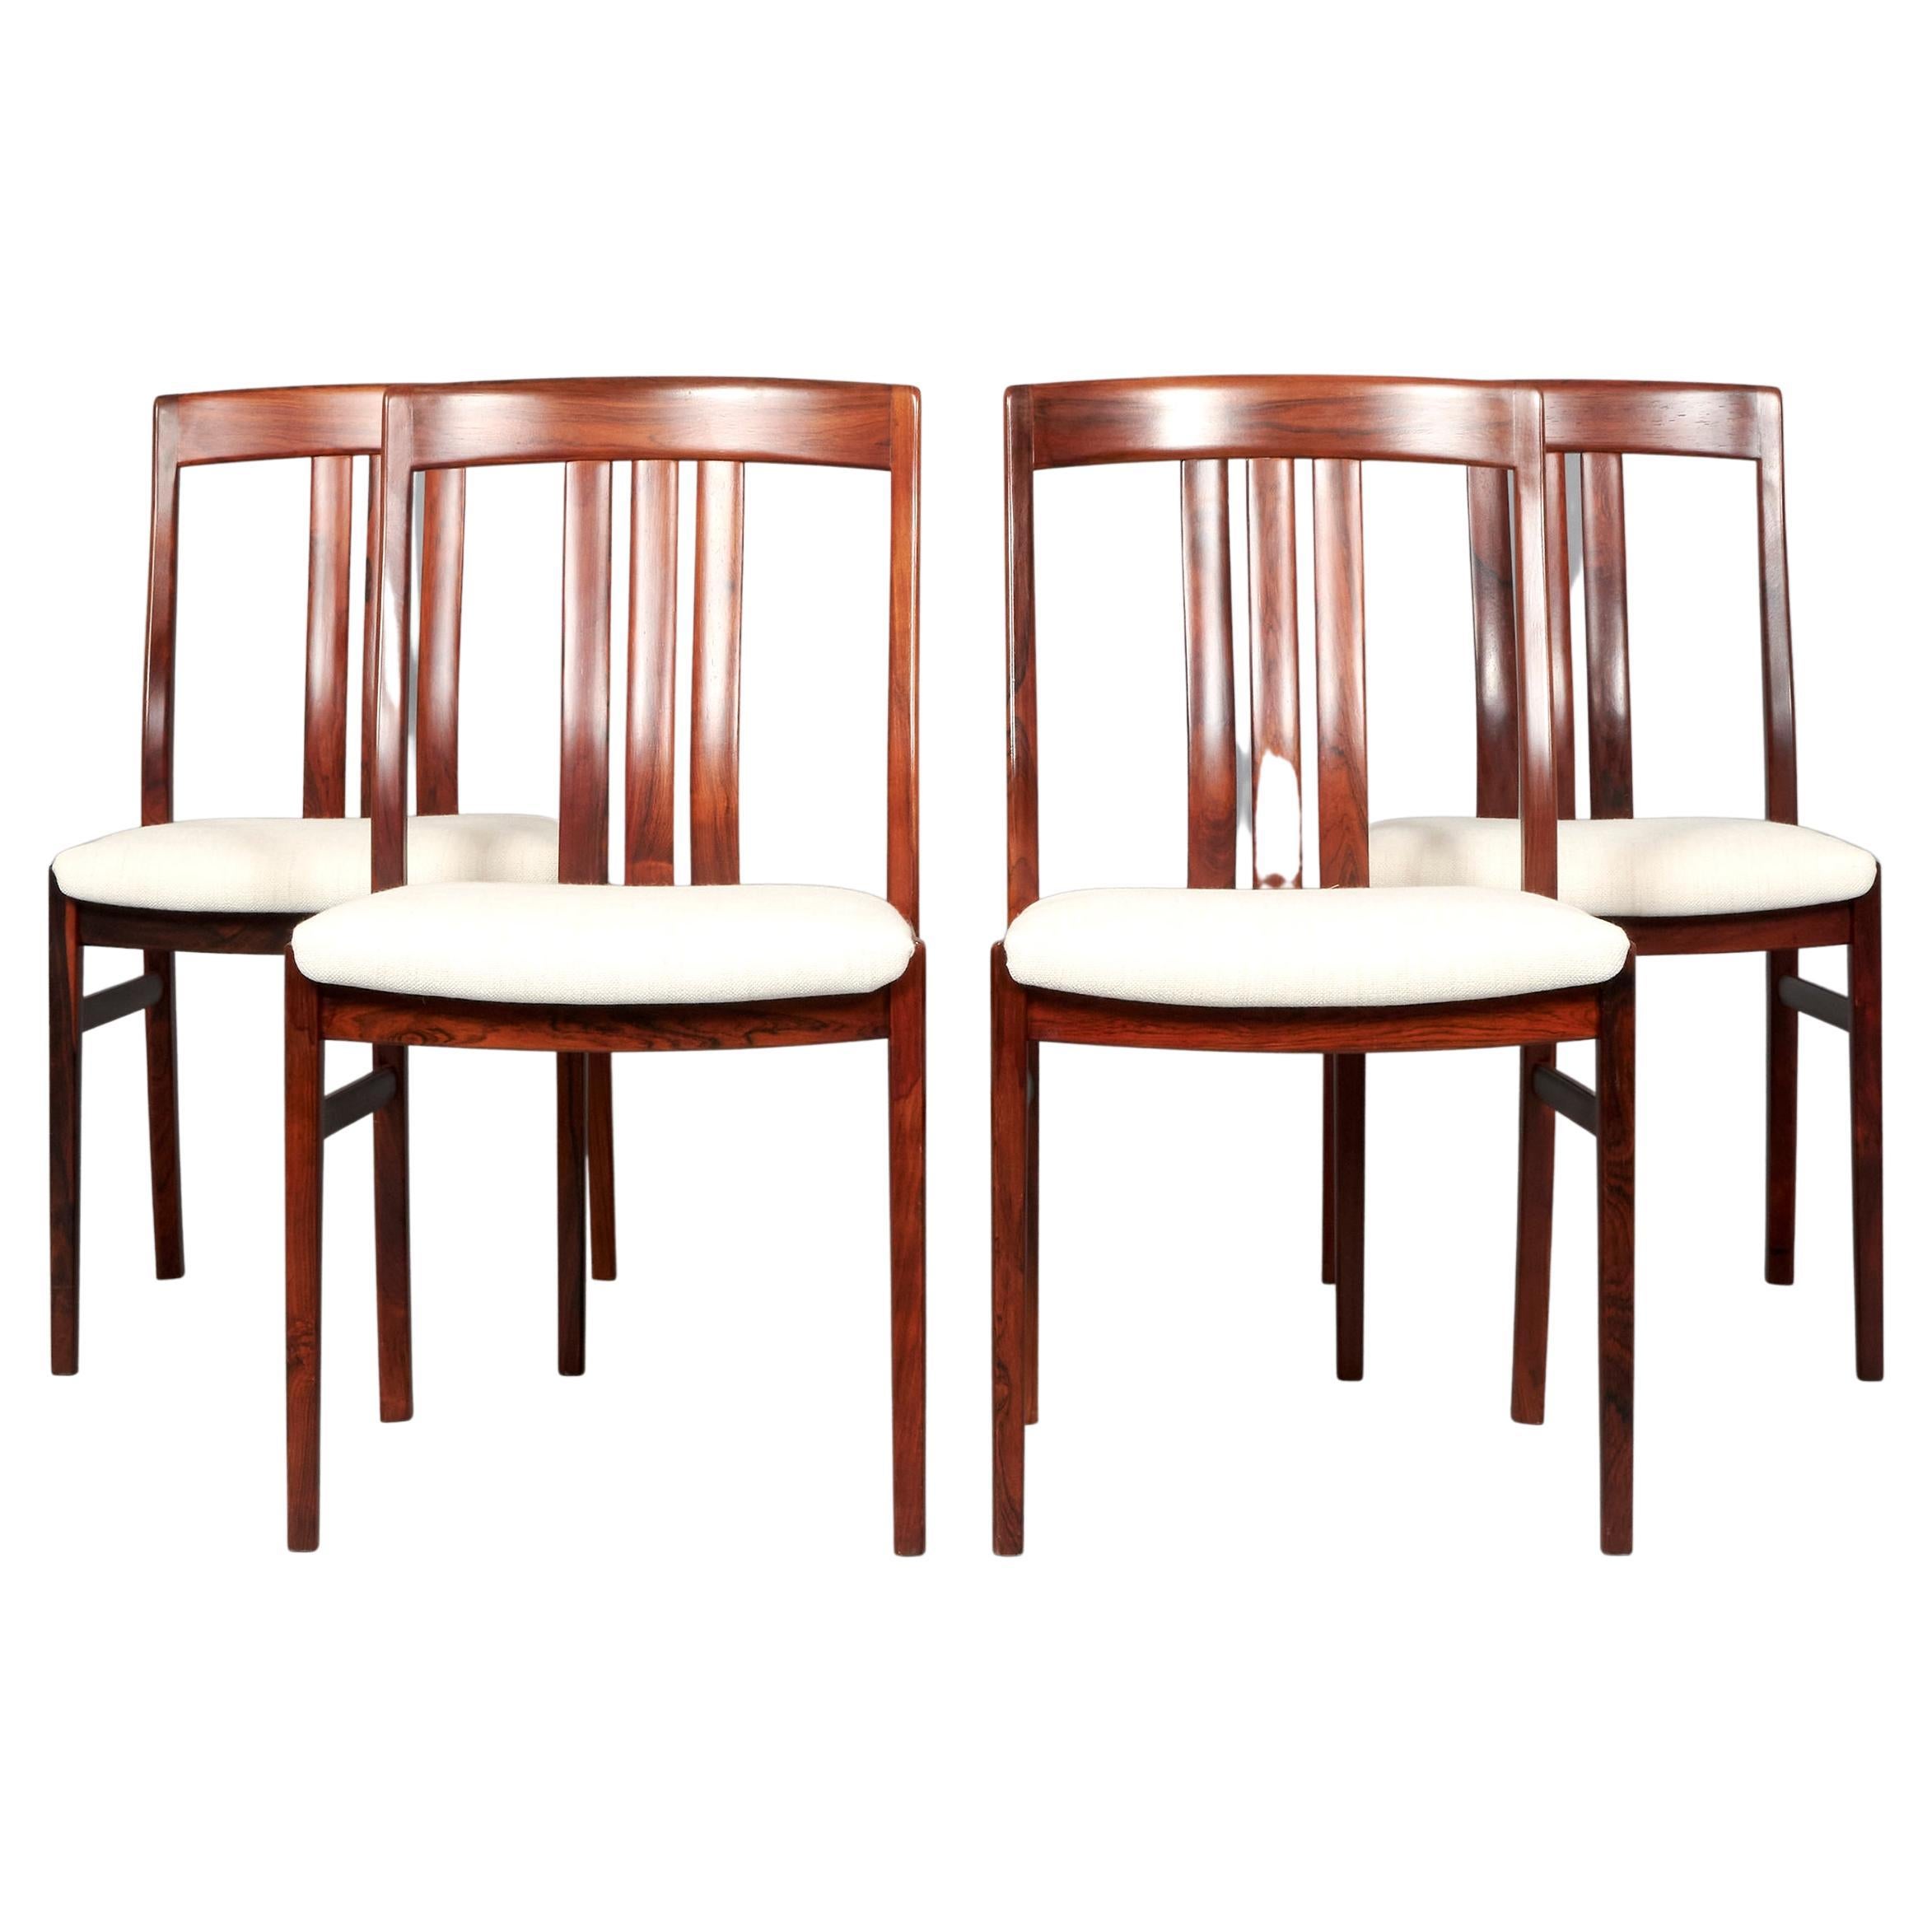 Mid-century modern Rosewood Dining Chairs set For Sale